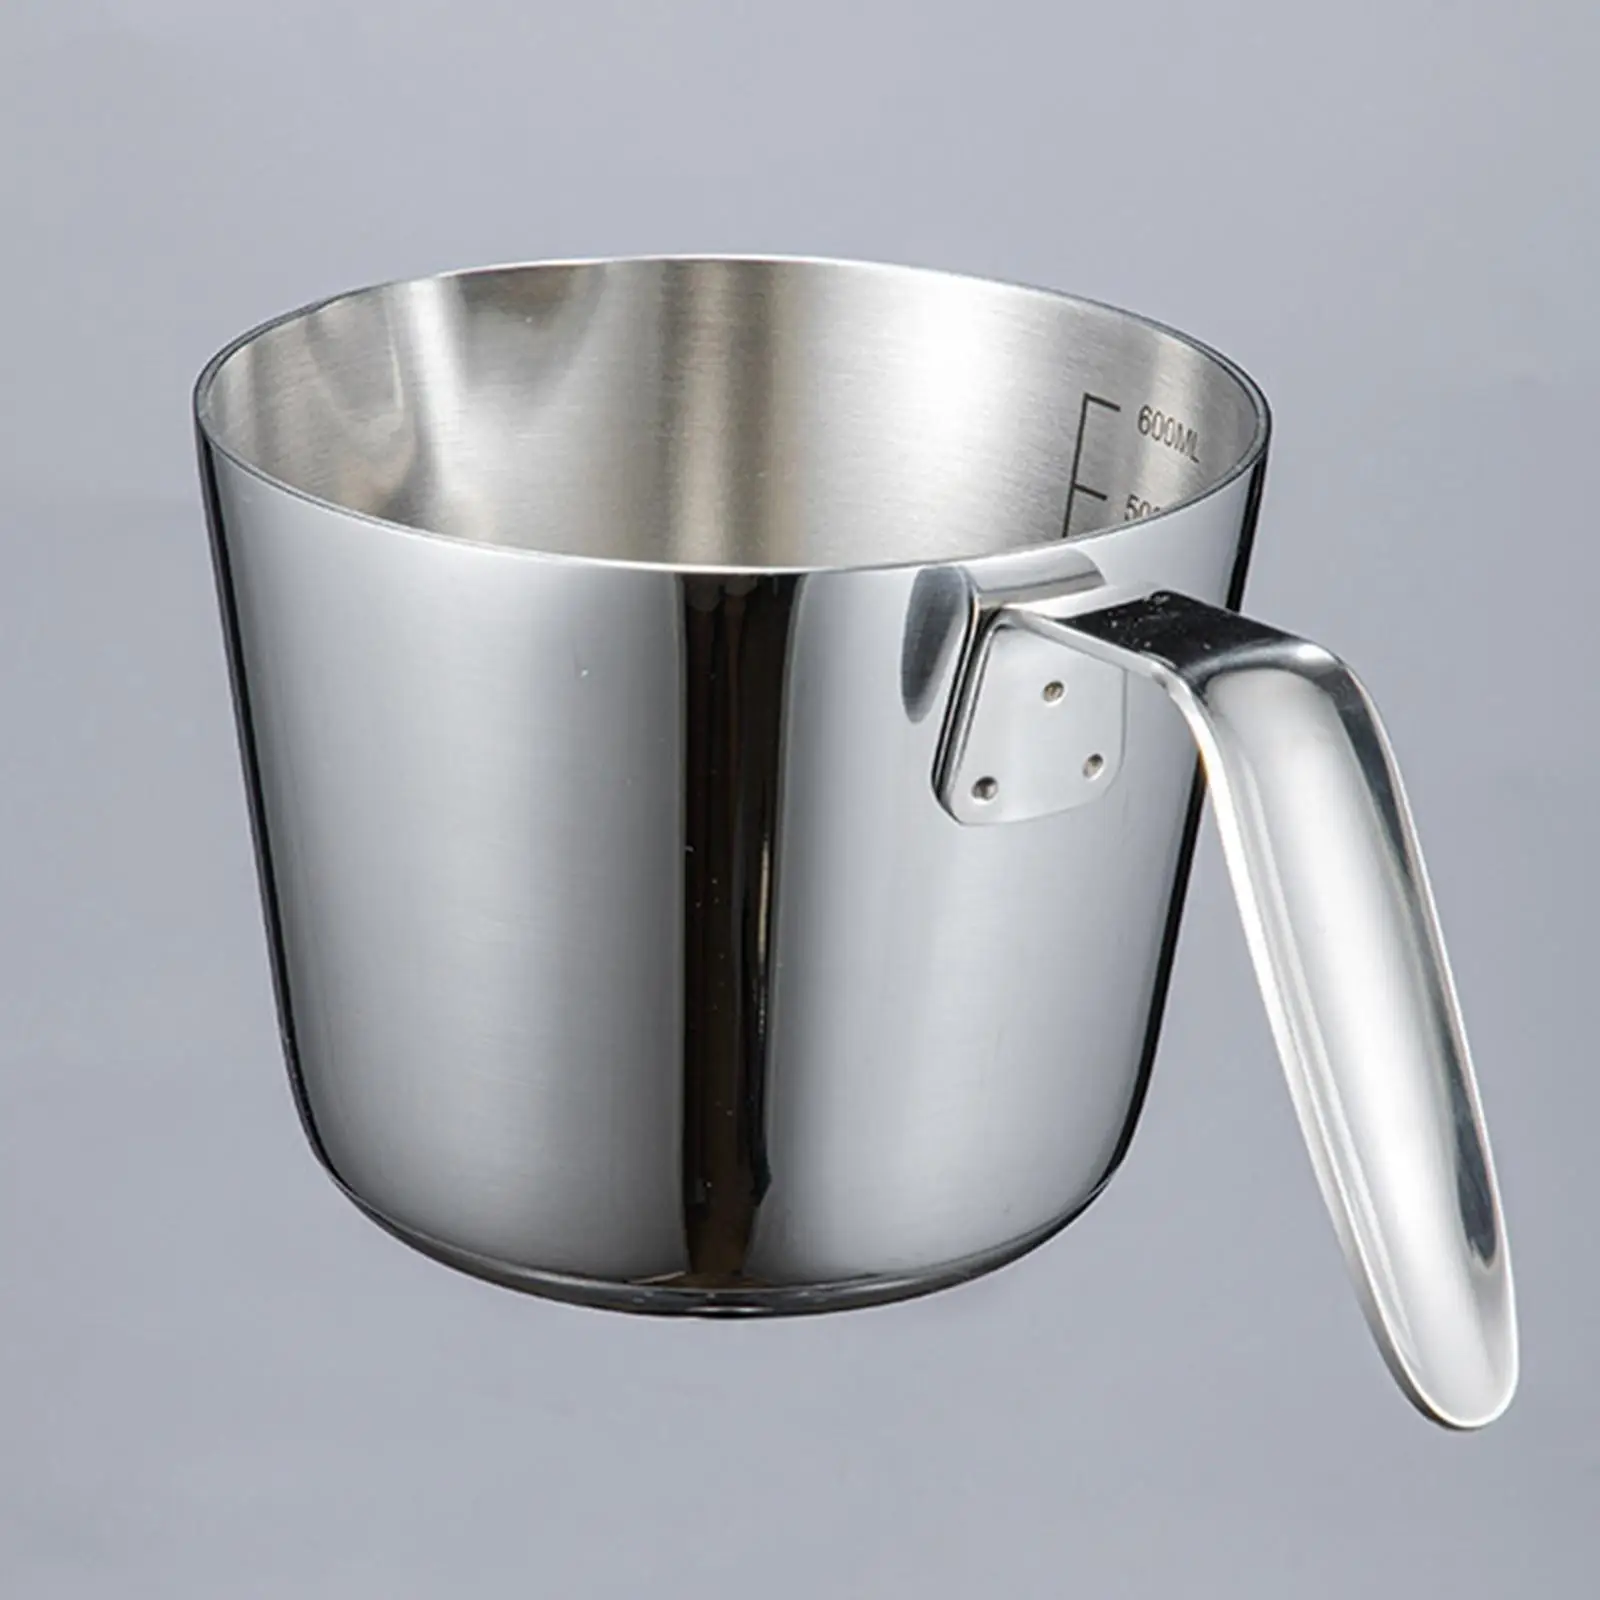 Thickening Milk Frothing Pitcher Jug Steamer Cup Steaming cup Convenient Durable Accurate Milk Frother Cup for Cake Sugar